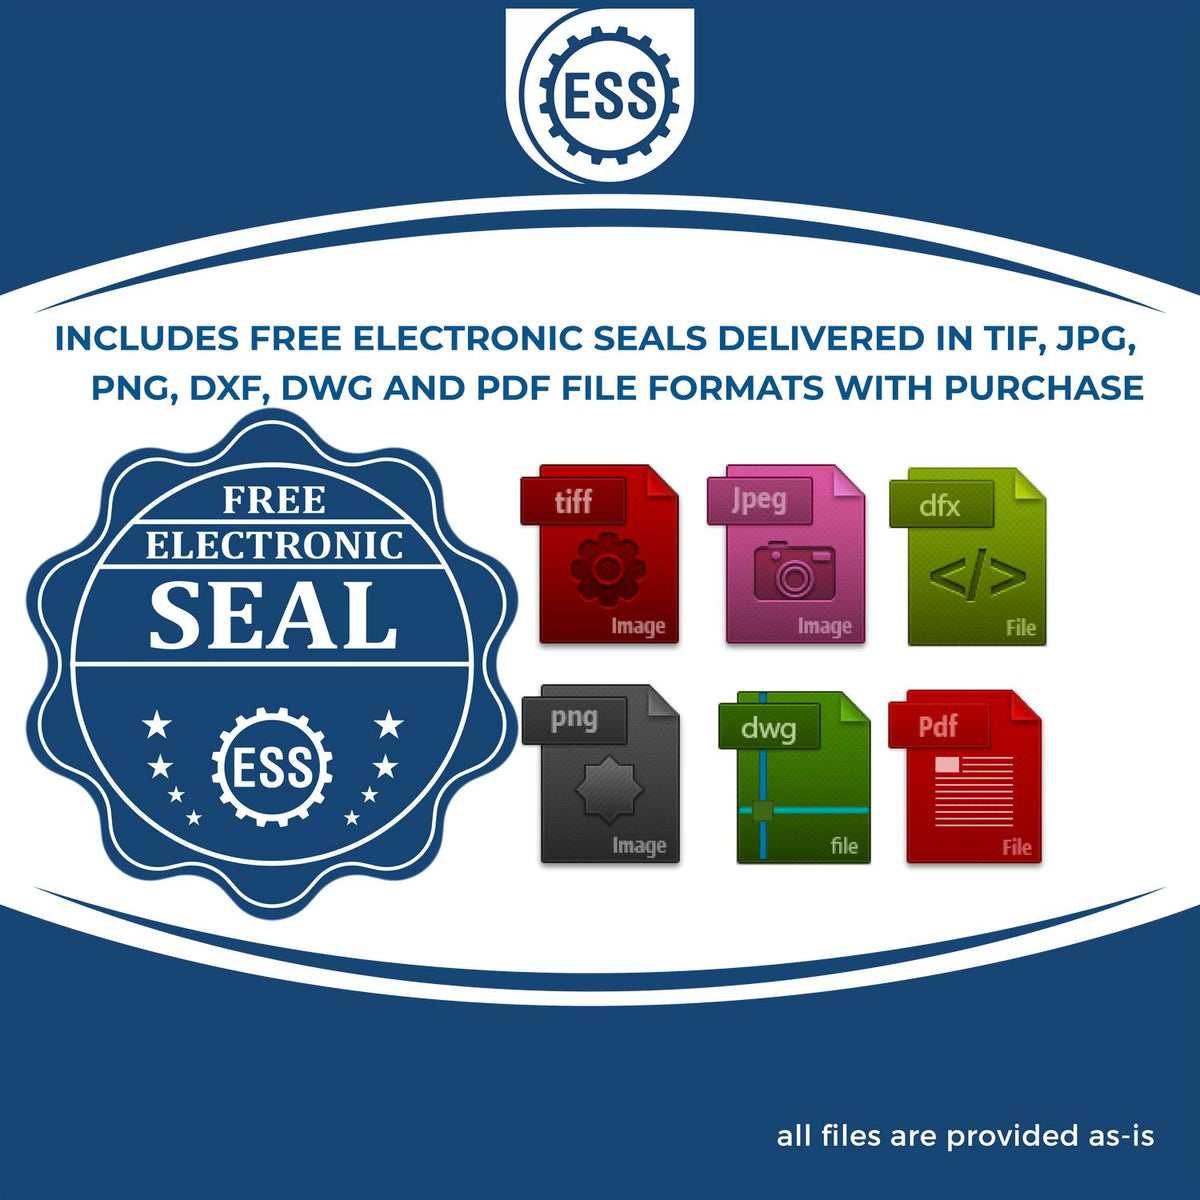 An infographic for the free electronic seal for the Long Reach Utah Geology Seal illustrating the different file type icons such as DXF, DWG, TIF, JPG and PNG.